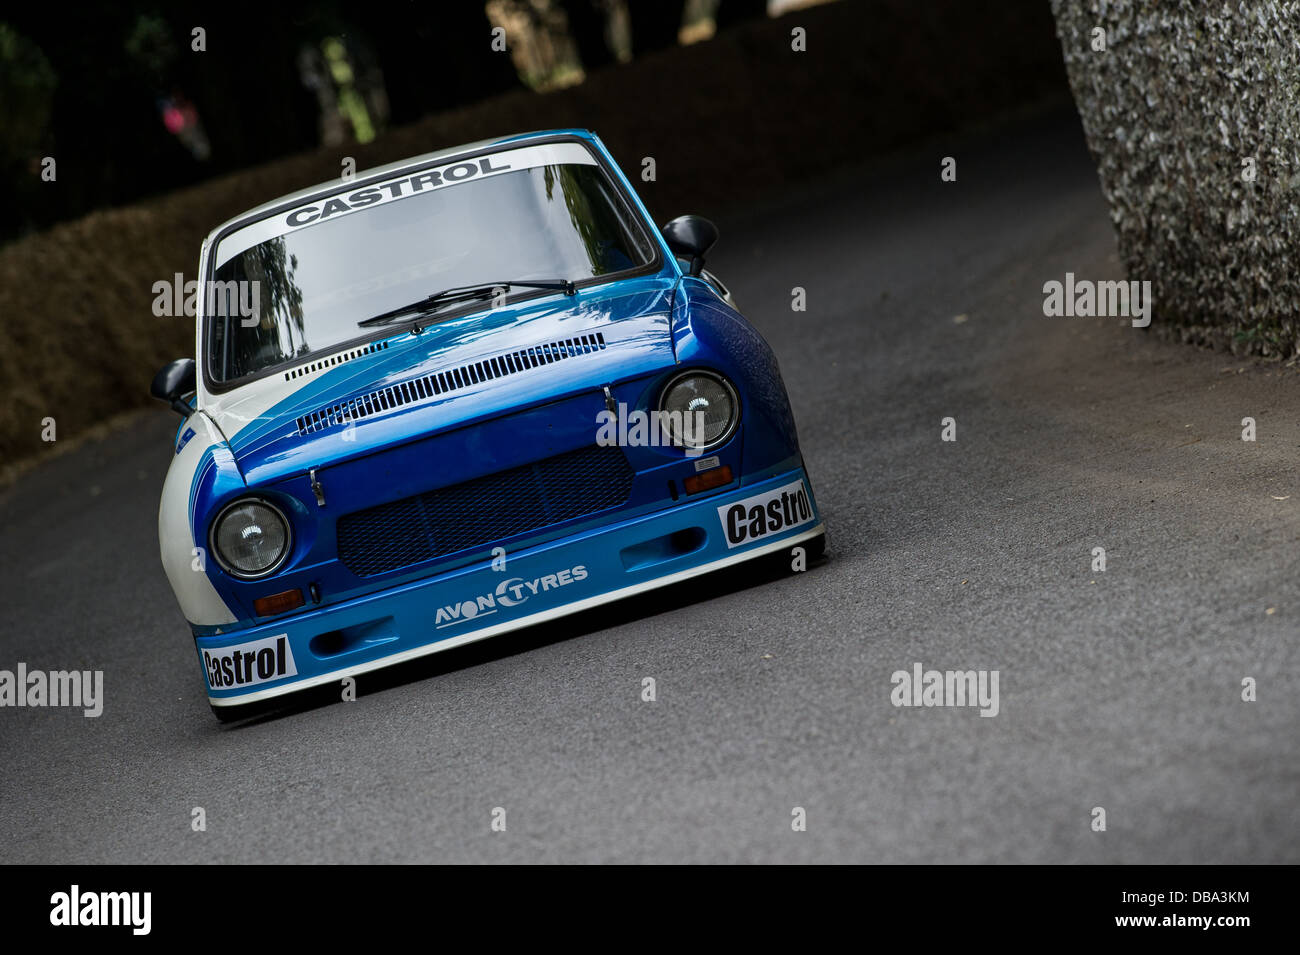 Chichester, UK - July 2013: Skoda 130 RS passes the flint wall in action at the Goodwood Festival of Speed on July 12, 2013. Stock Photo